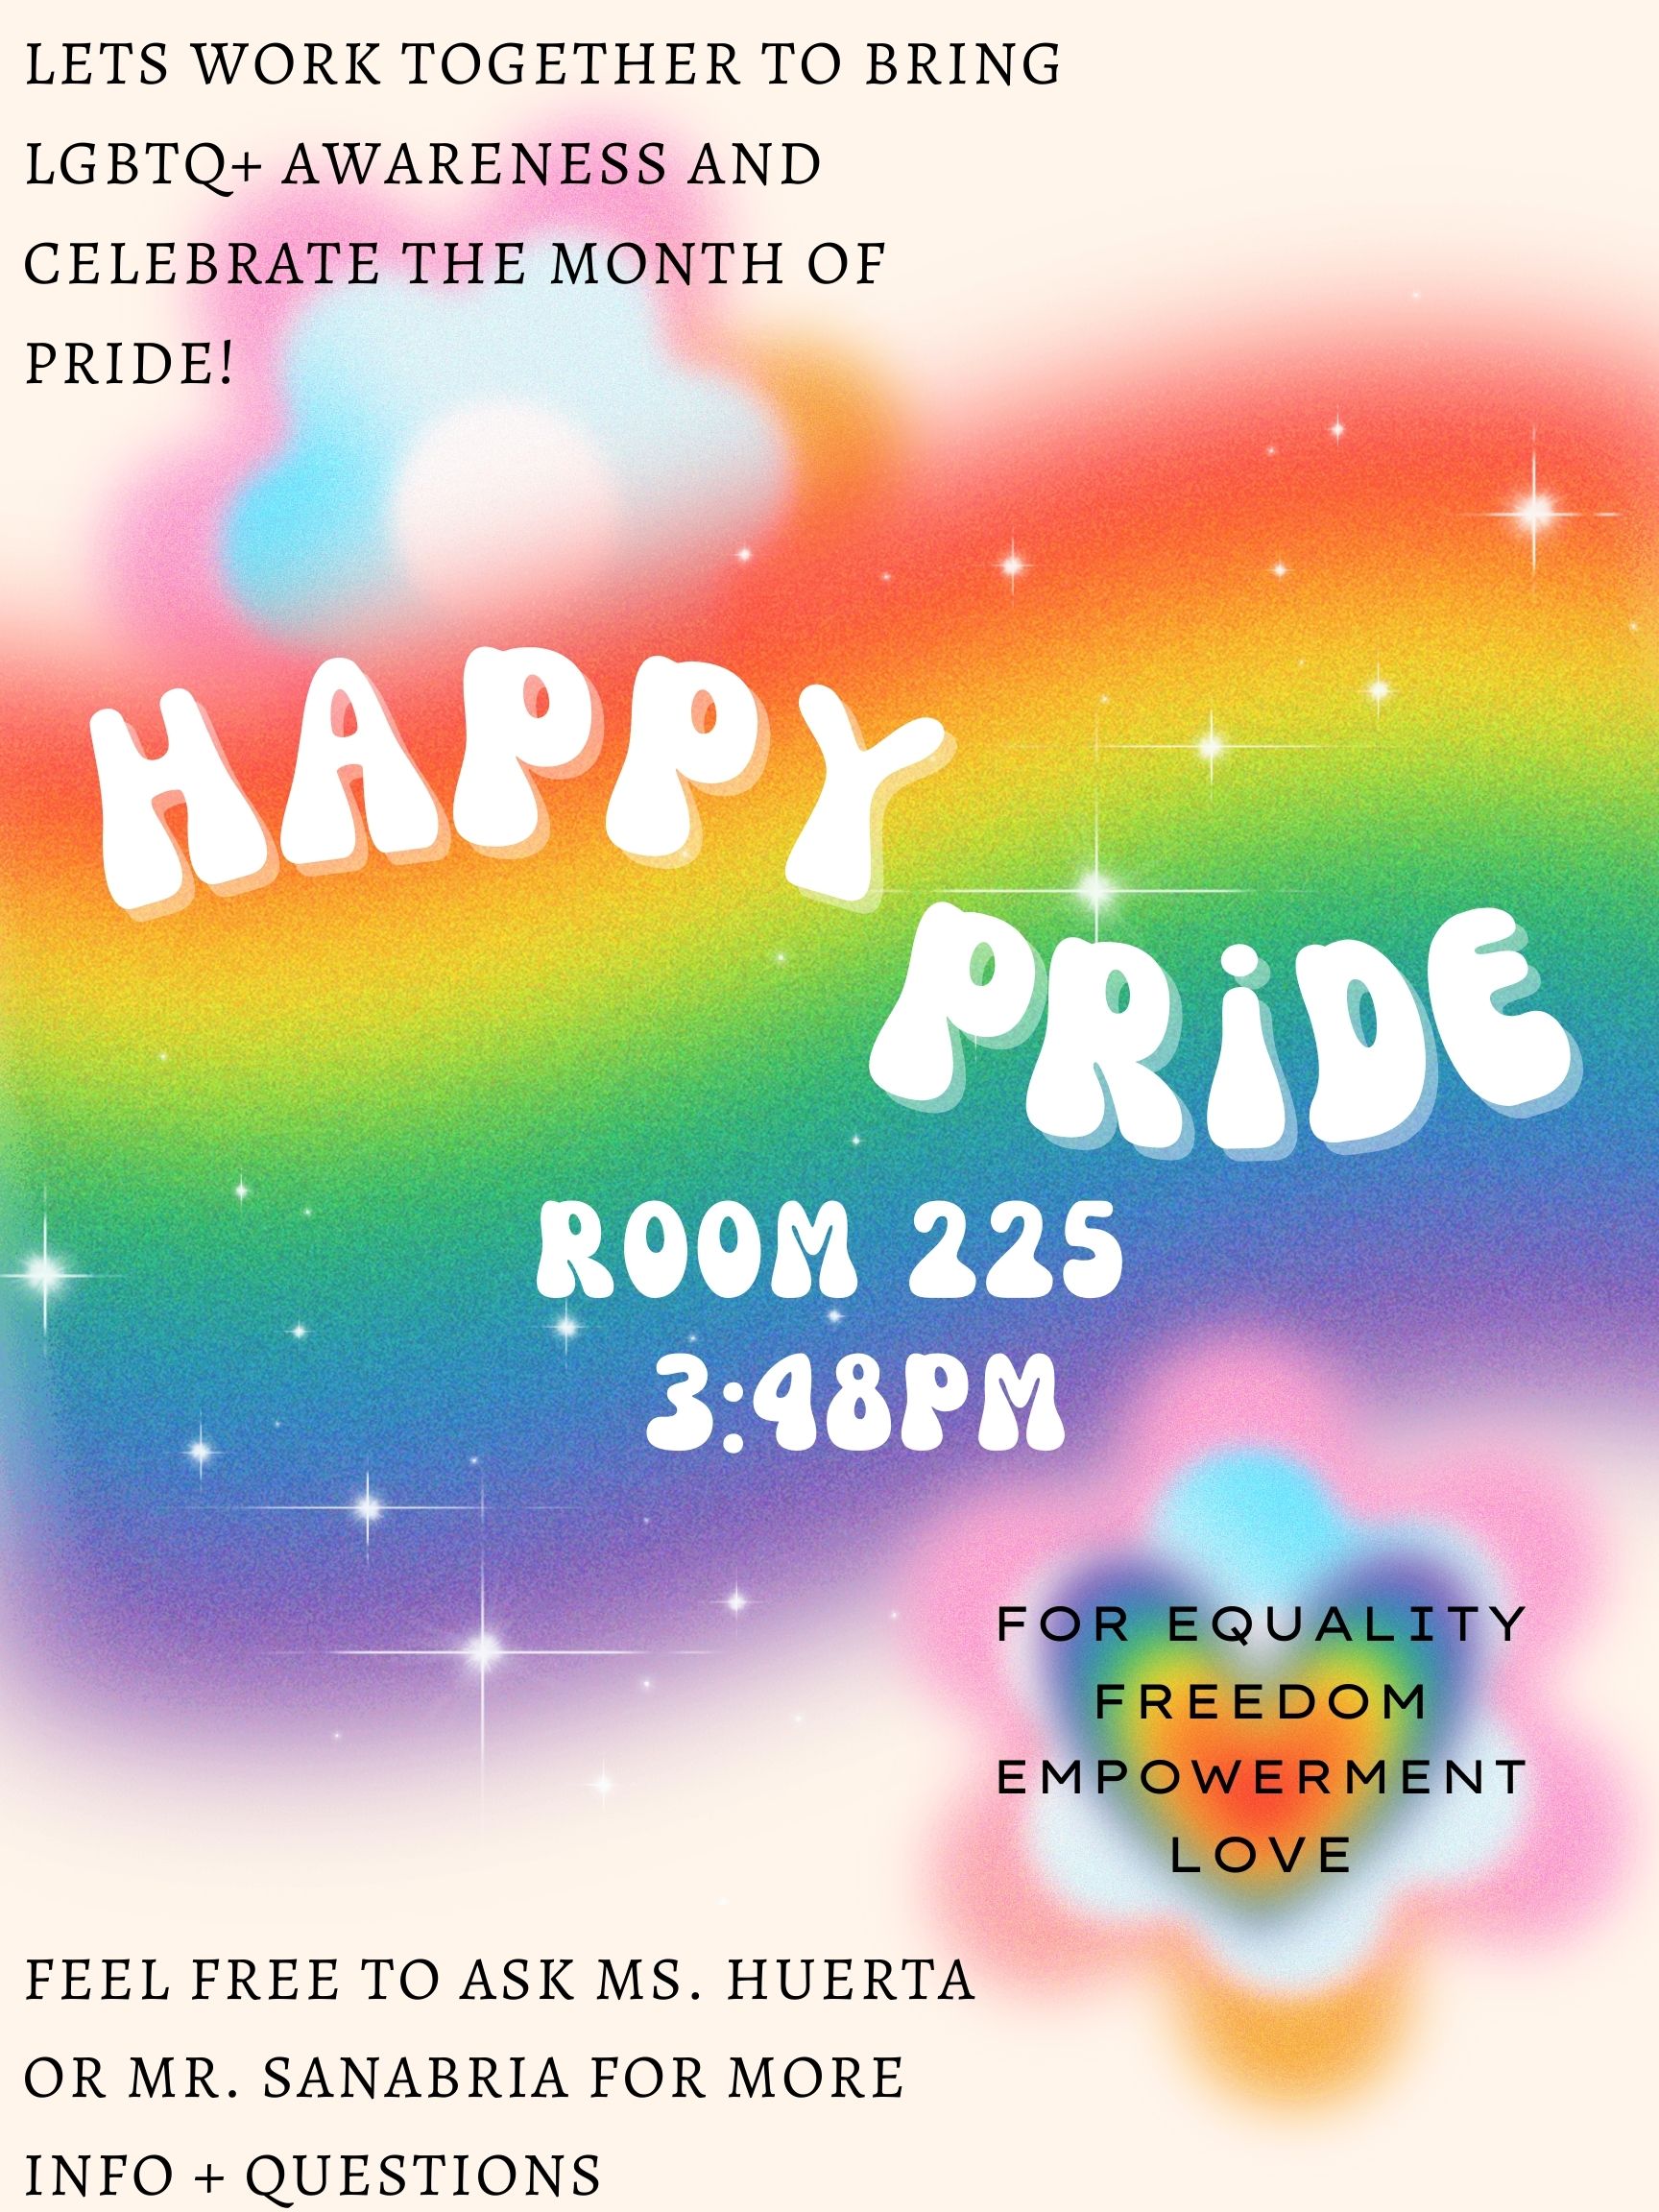 This graphic is a poster for an ITW David Speer Academy Pride and Allies Club event. The title in the middle says "Happy Pride" with the details right underneath which say "Room 225, 3:48 PM". A giant sparkly rainbow is behind the title and details and the title is surrounded by white sparkles. Around the rainbow on the top left and bottom right are glowing rainbow flowers. On top of the flower in the top left corner is text that reads "Let's work together to bring LGBTQ+ awareness and celebrate the month of Pride!". In the bottom right corner on top of the flower is more text that reads "For equality, freedom, empowerment, love". In the bottom left corner is text that reads "Feel free to ask Ms. Huerta or Mr. Sanabria for more info and questions". The background is a cream white color.